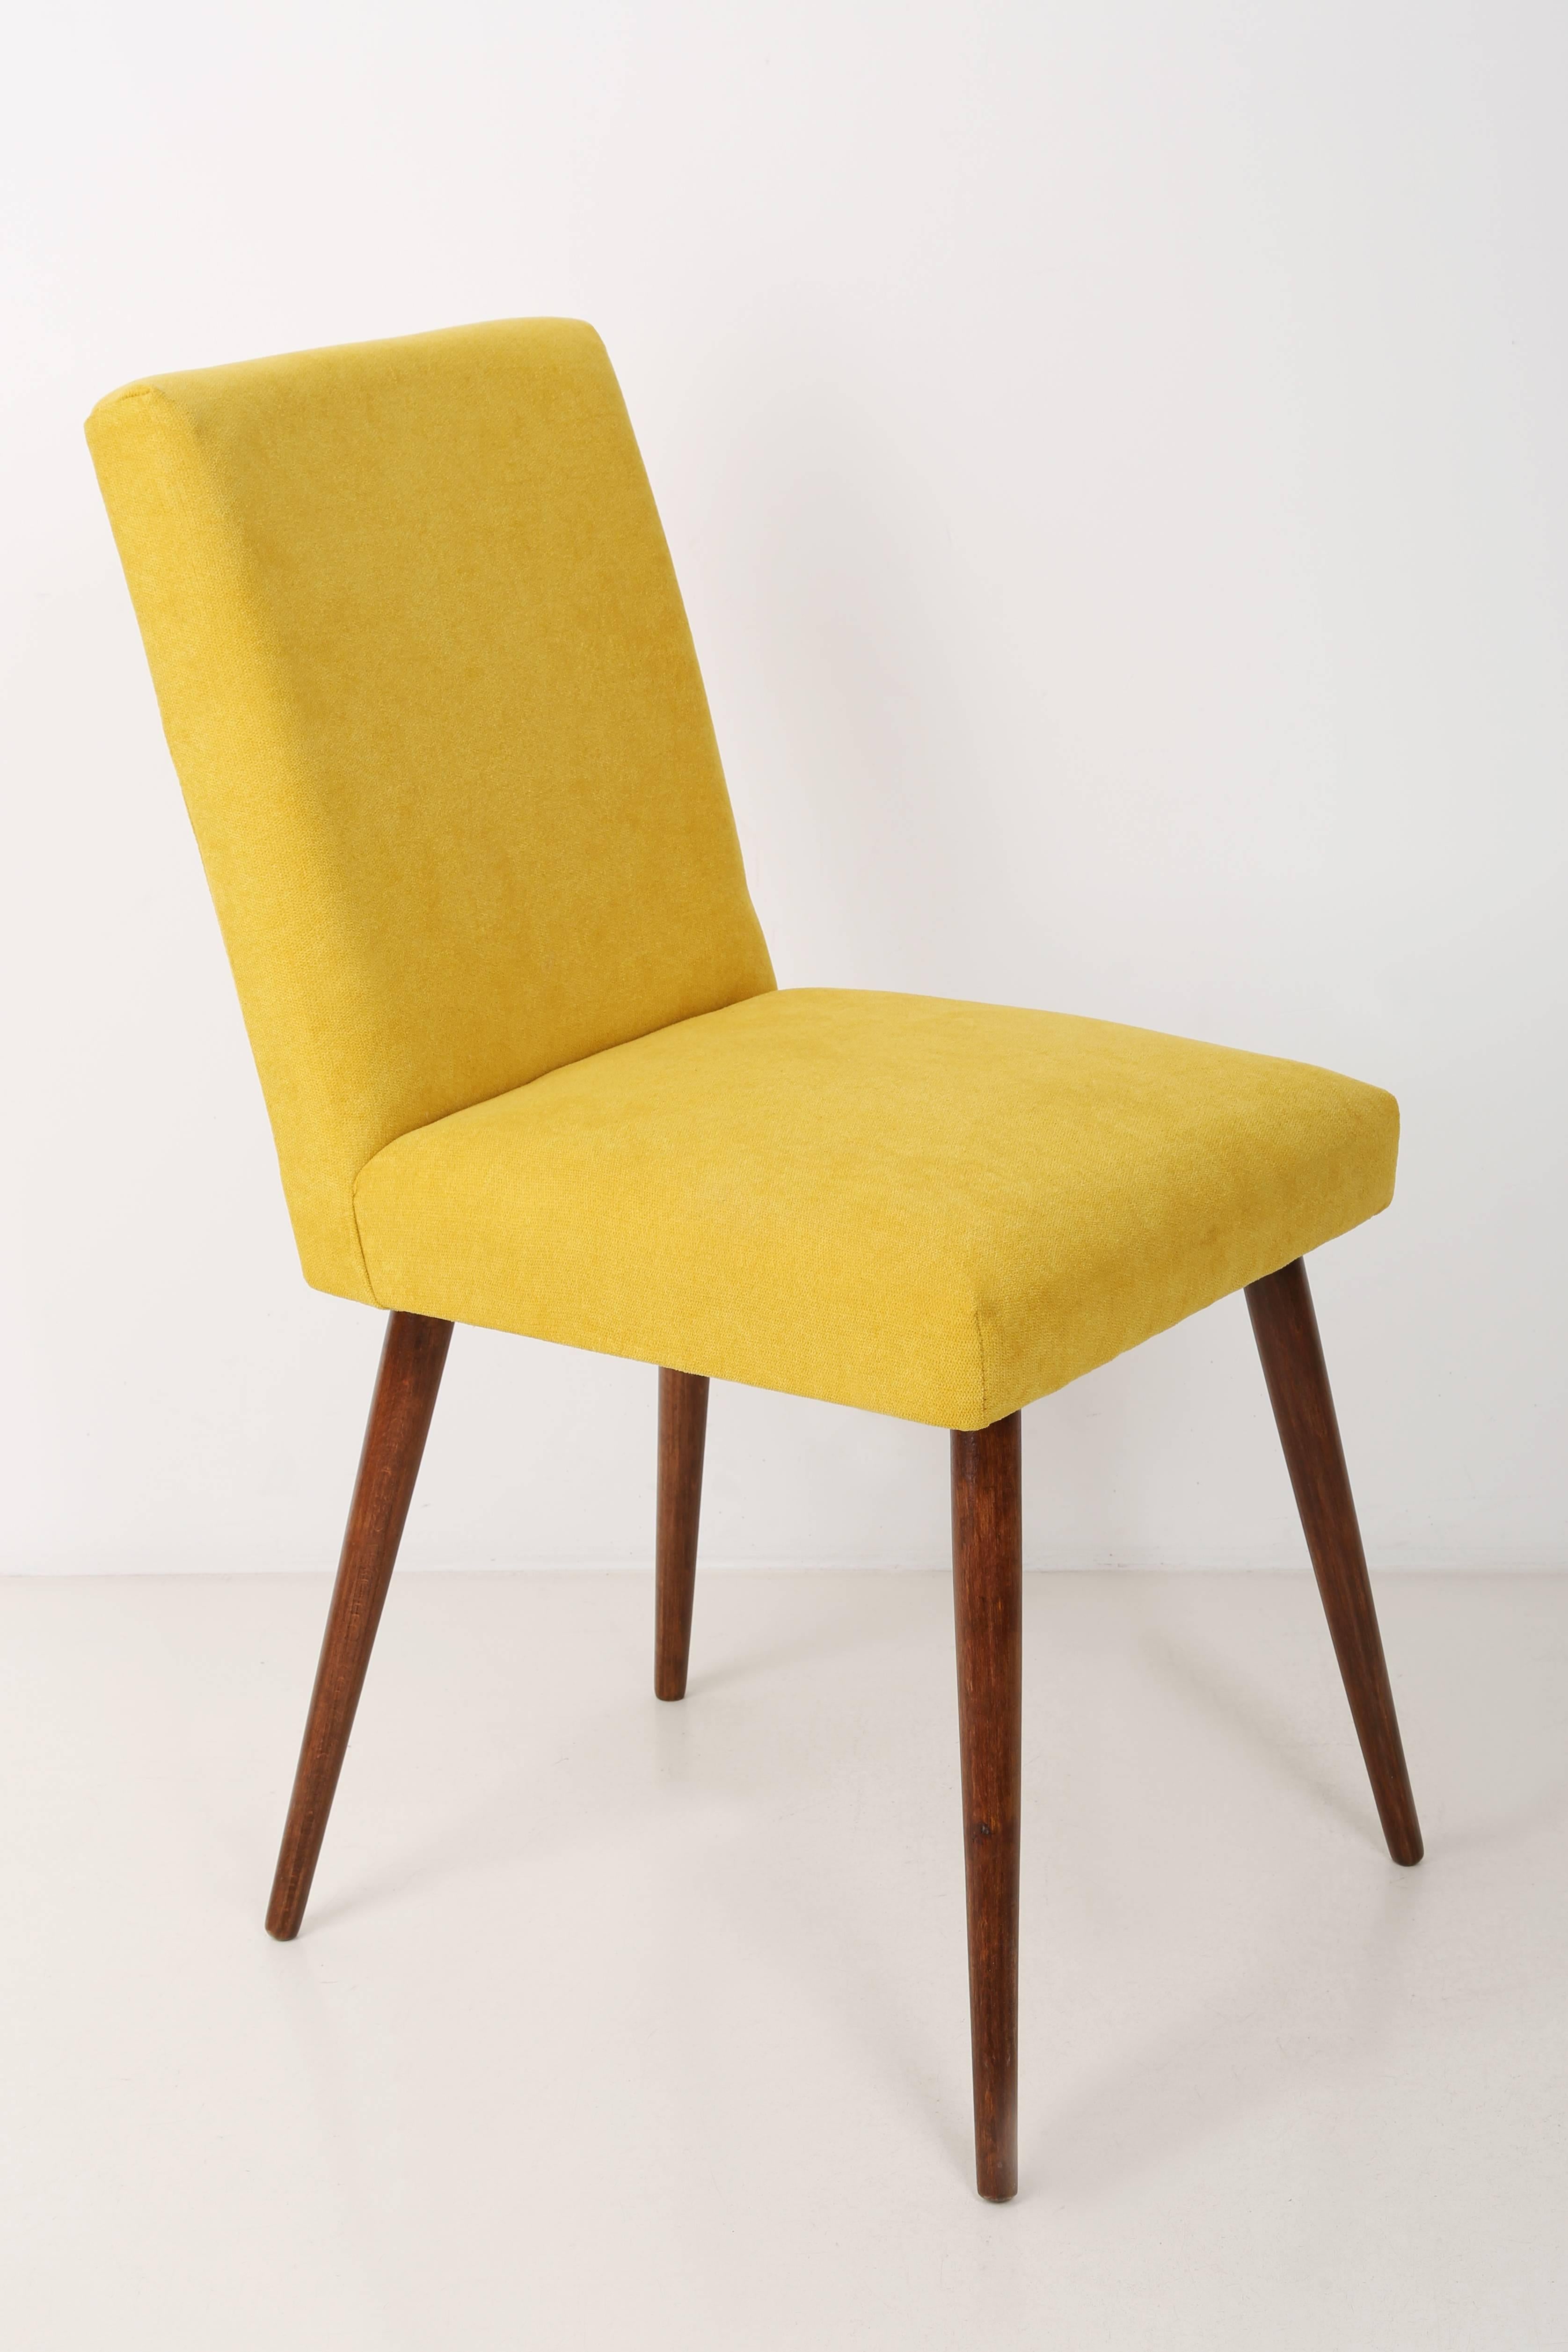 Mid-Century Modern Set of Four Mid Century Yellow Chairs, Europe, 1960s. For Sale